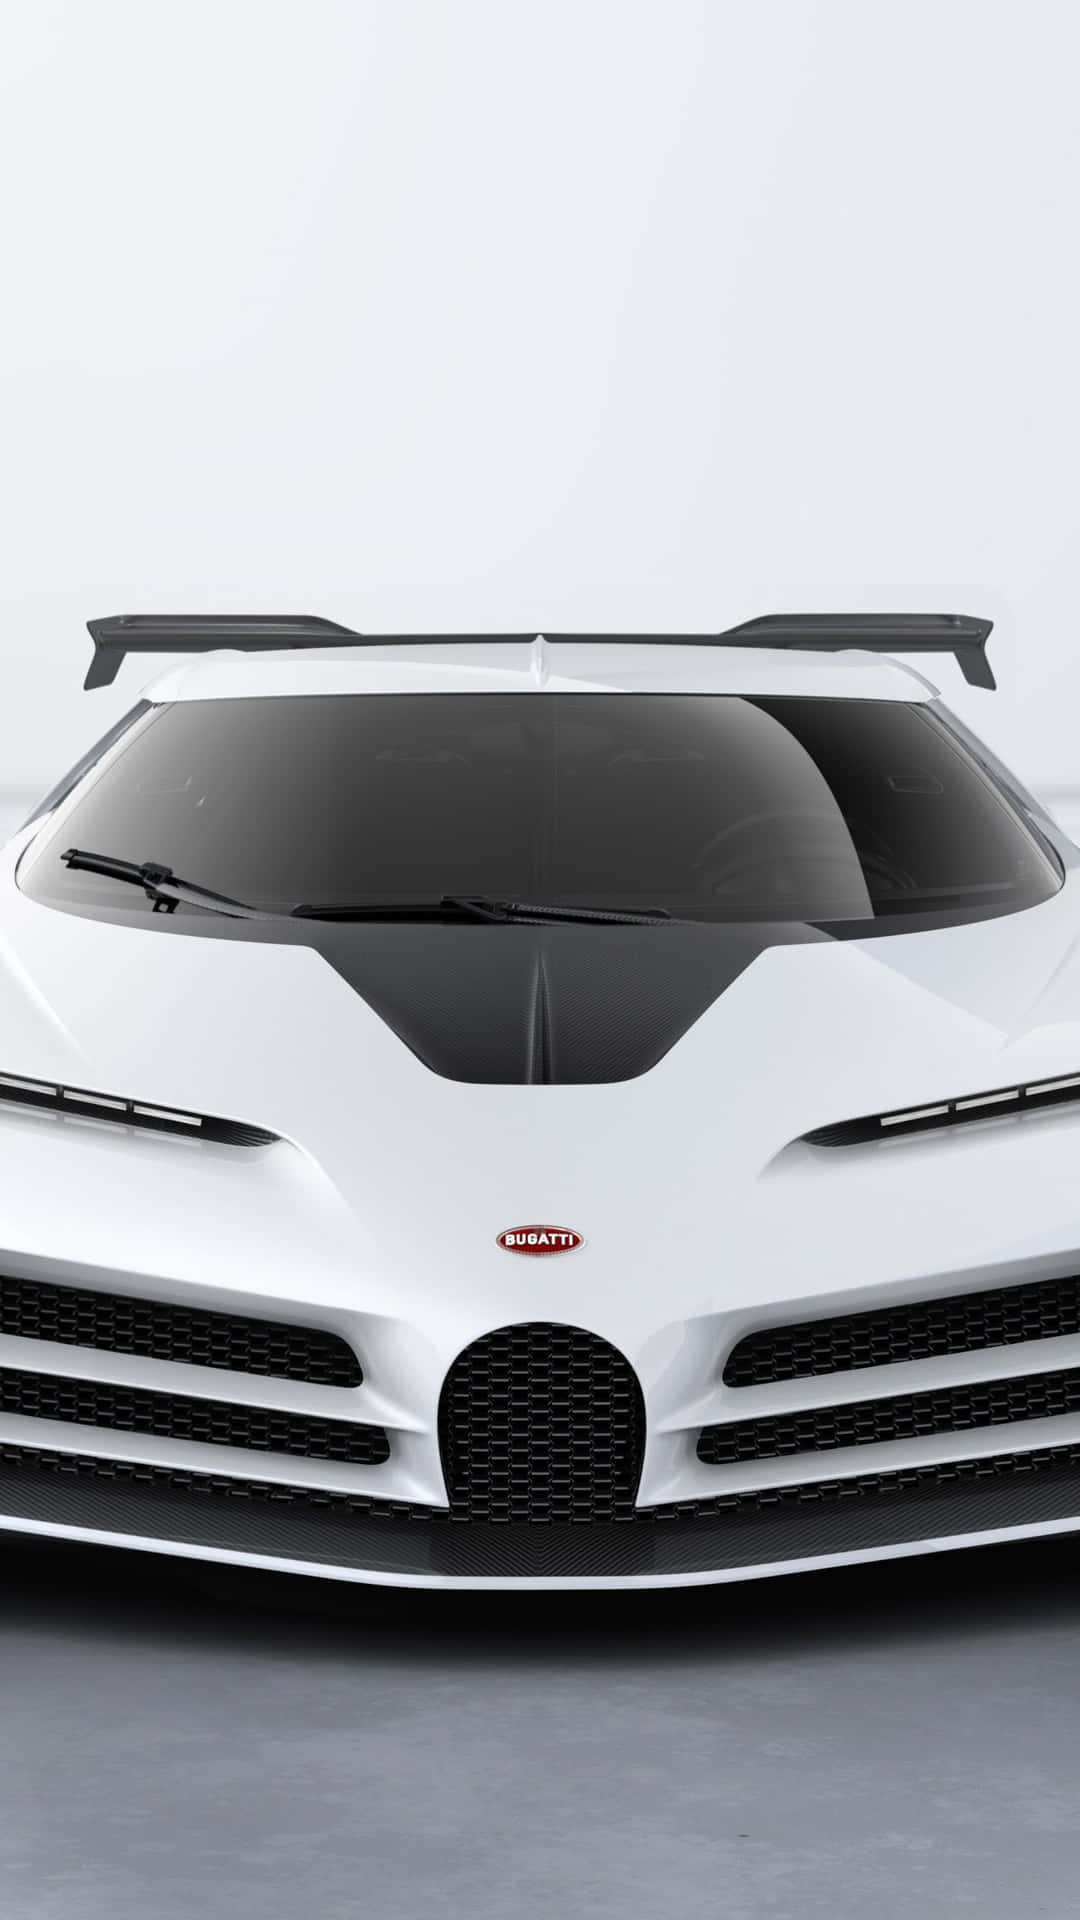 Experience Unmatched Luxury with the Bugatti Phone Wallpaper